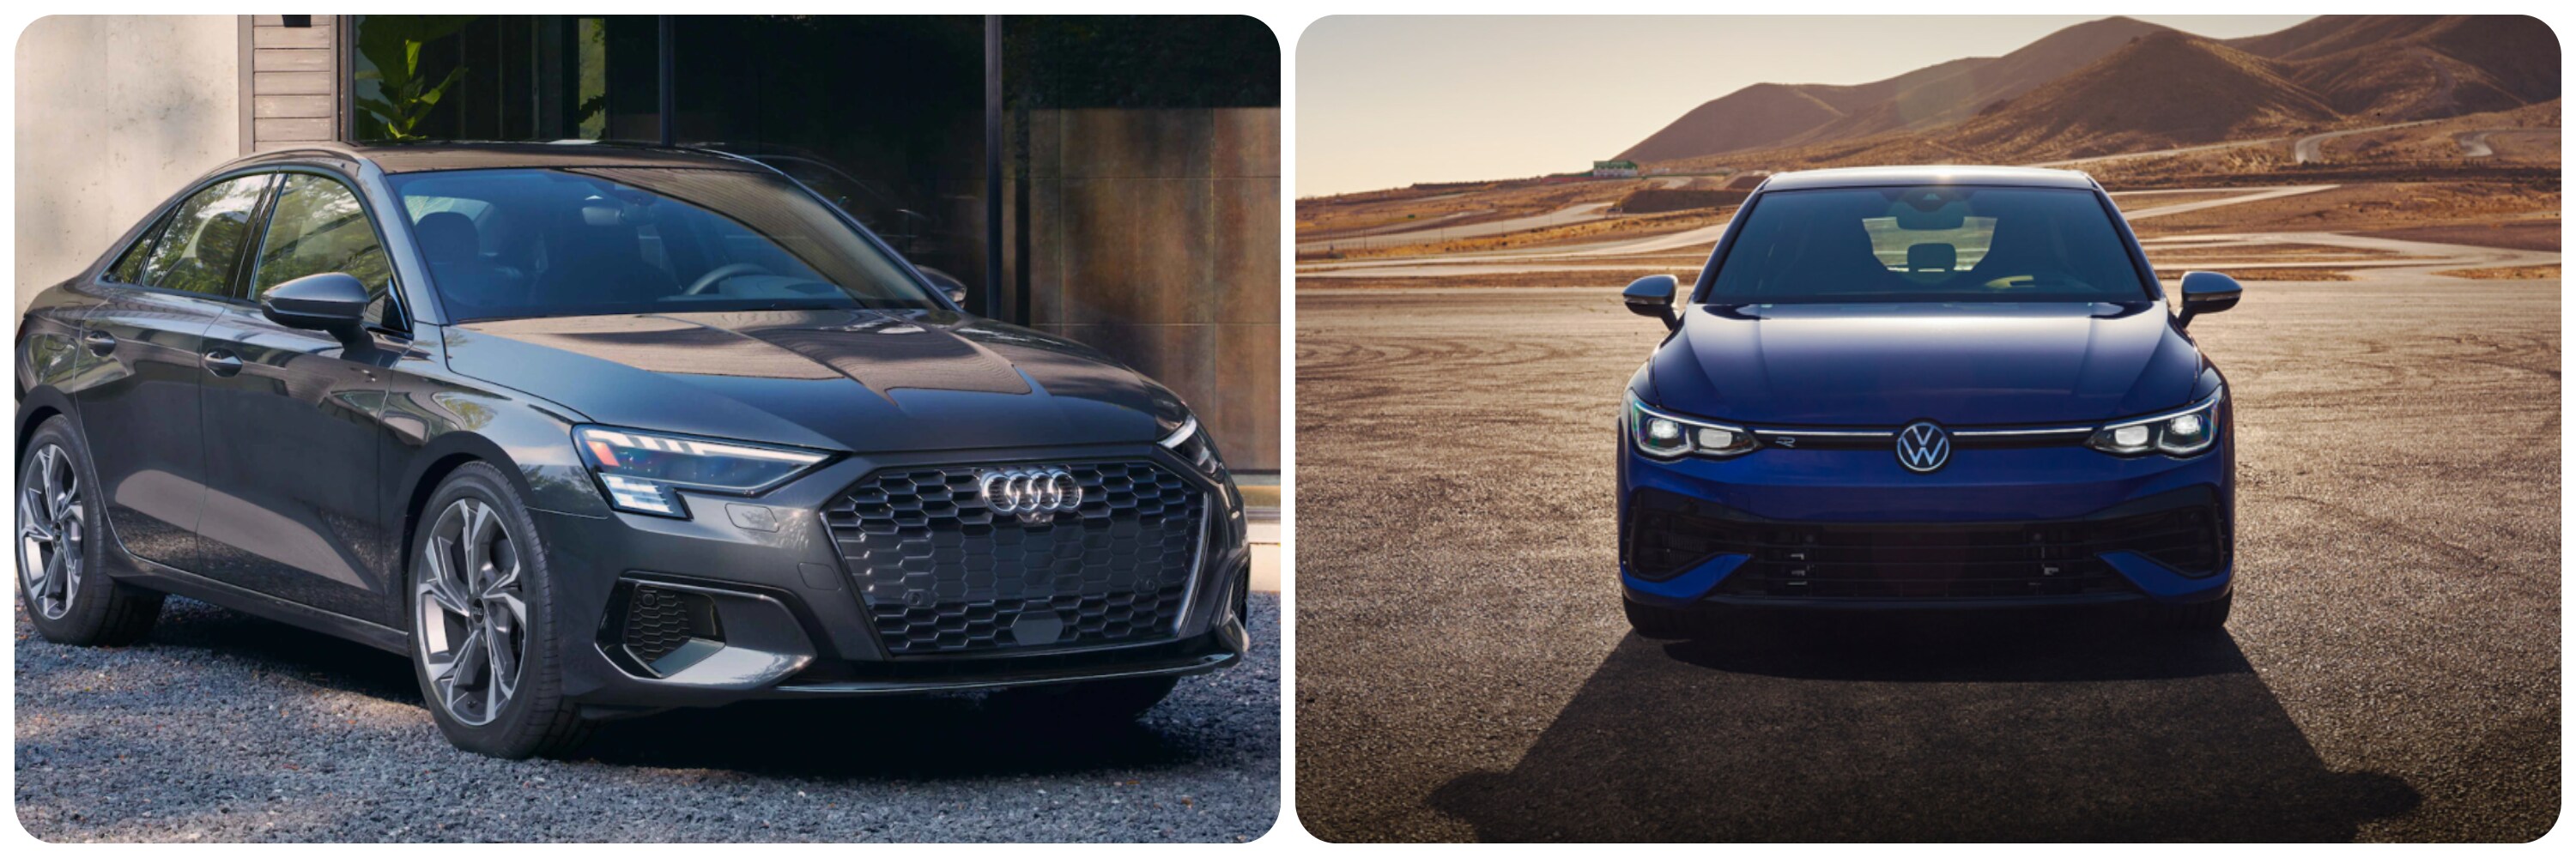 On the left a dark gray 2022 Audi A3 sits parked at an angle, showing off the grille and profile of the vehicle as it sits parked in a gravel driveway. On the right, a deep indigo 2022 Volkswagen Golf-R sits parked directly facing the viewer in a desert with rolling mountains in the background.